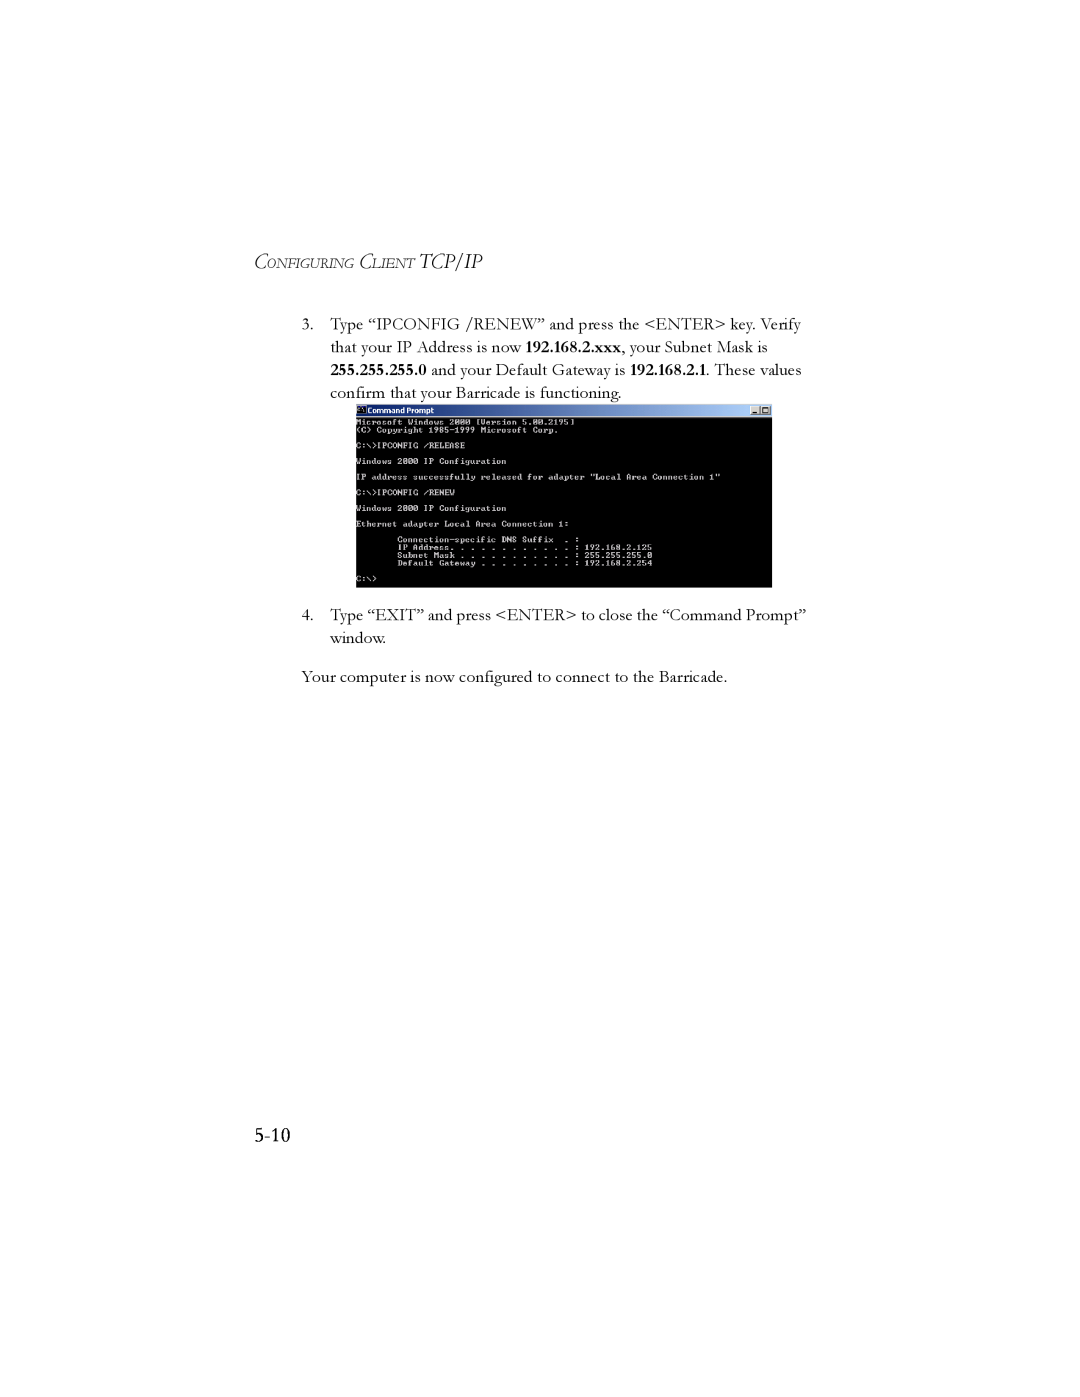 SMC Networks SMC7404BRA EU manual 5-10, Type “EXIT” and press ENTER to close the “Command Prompt” window 